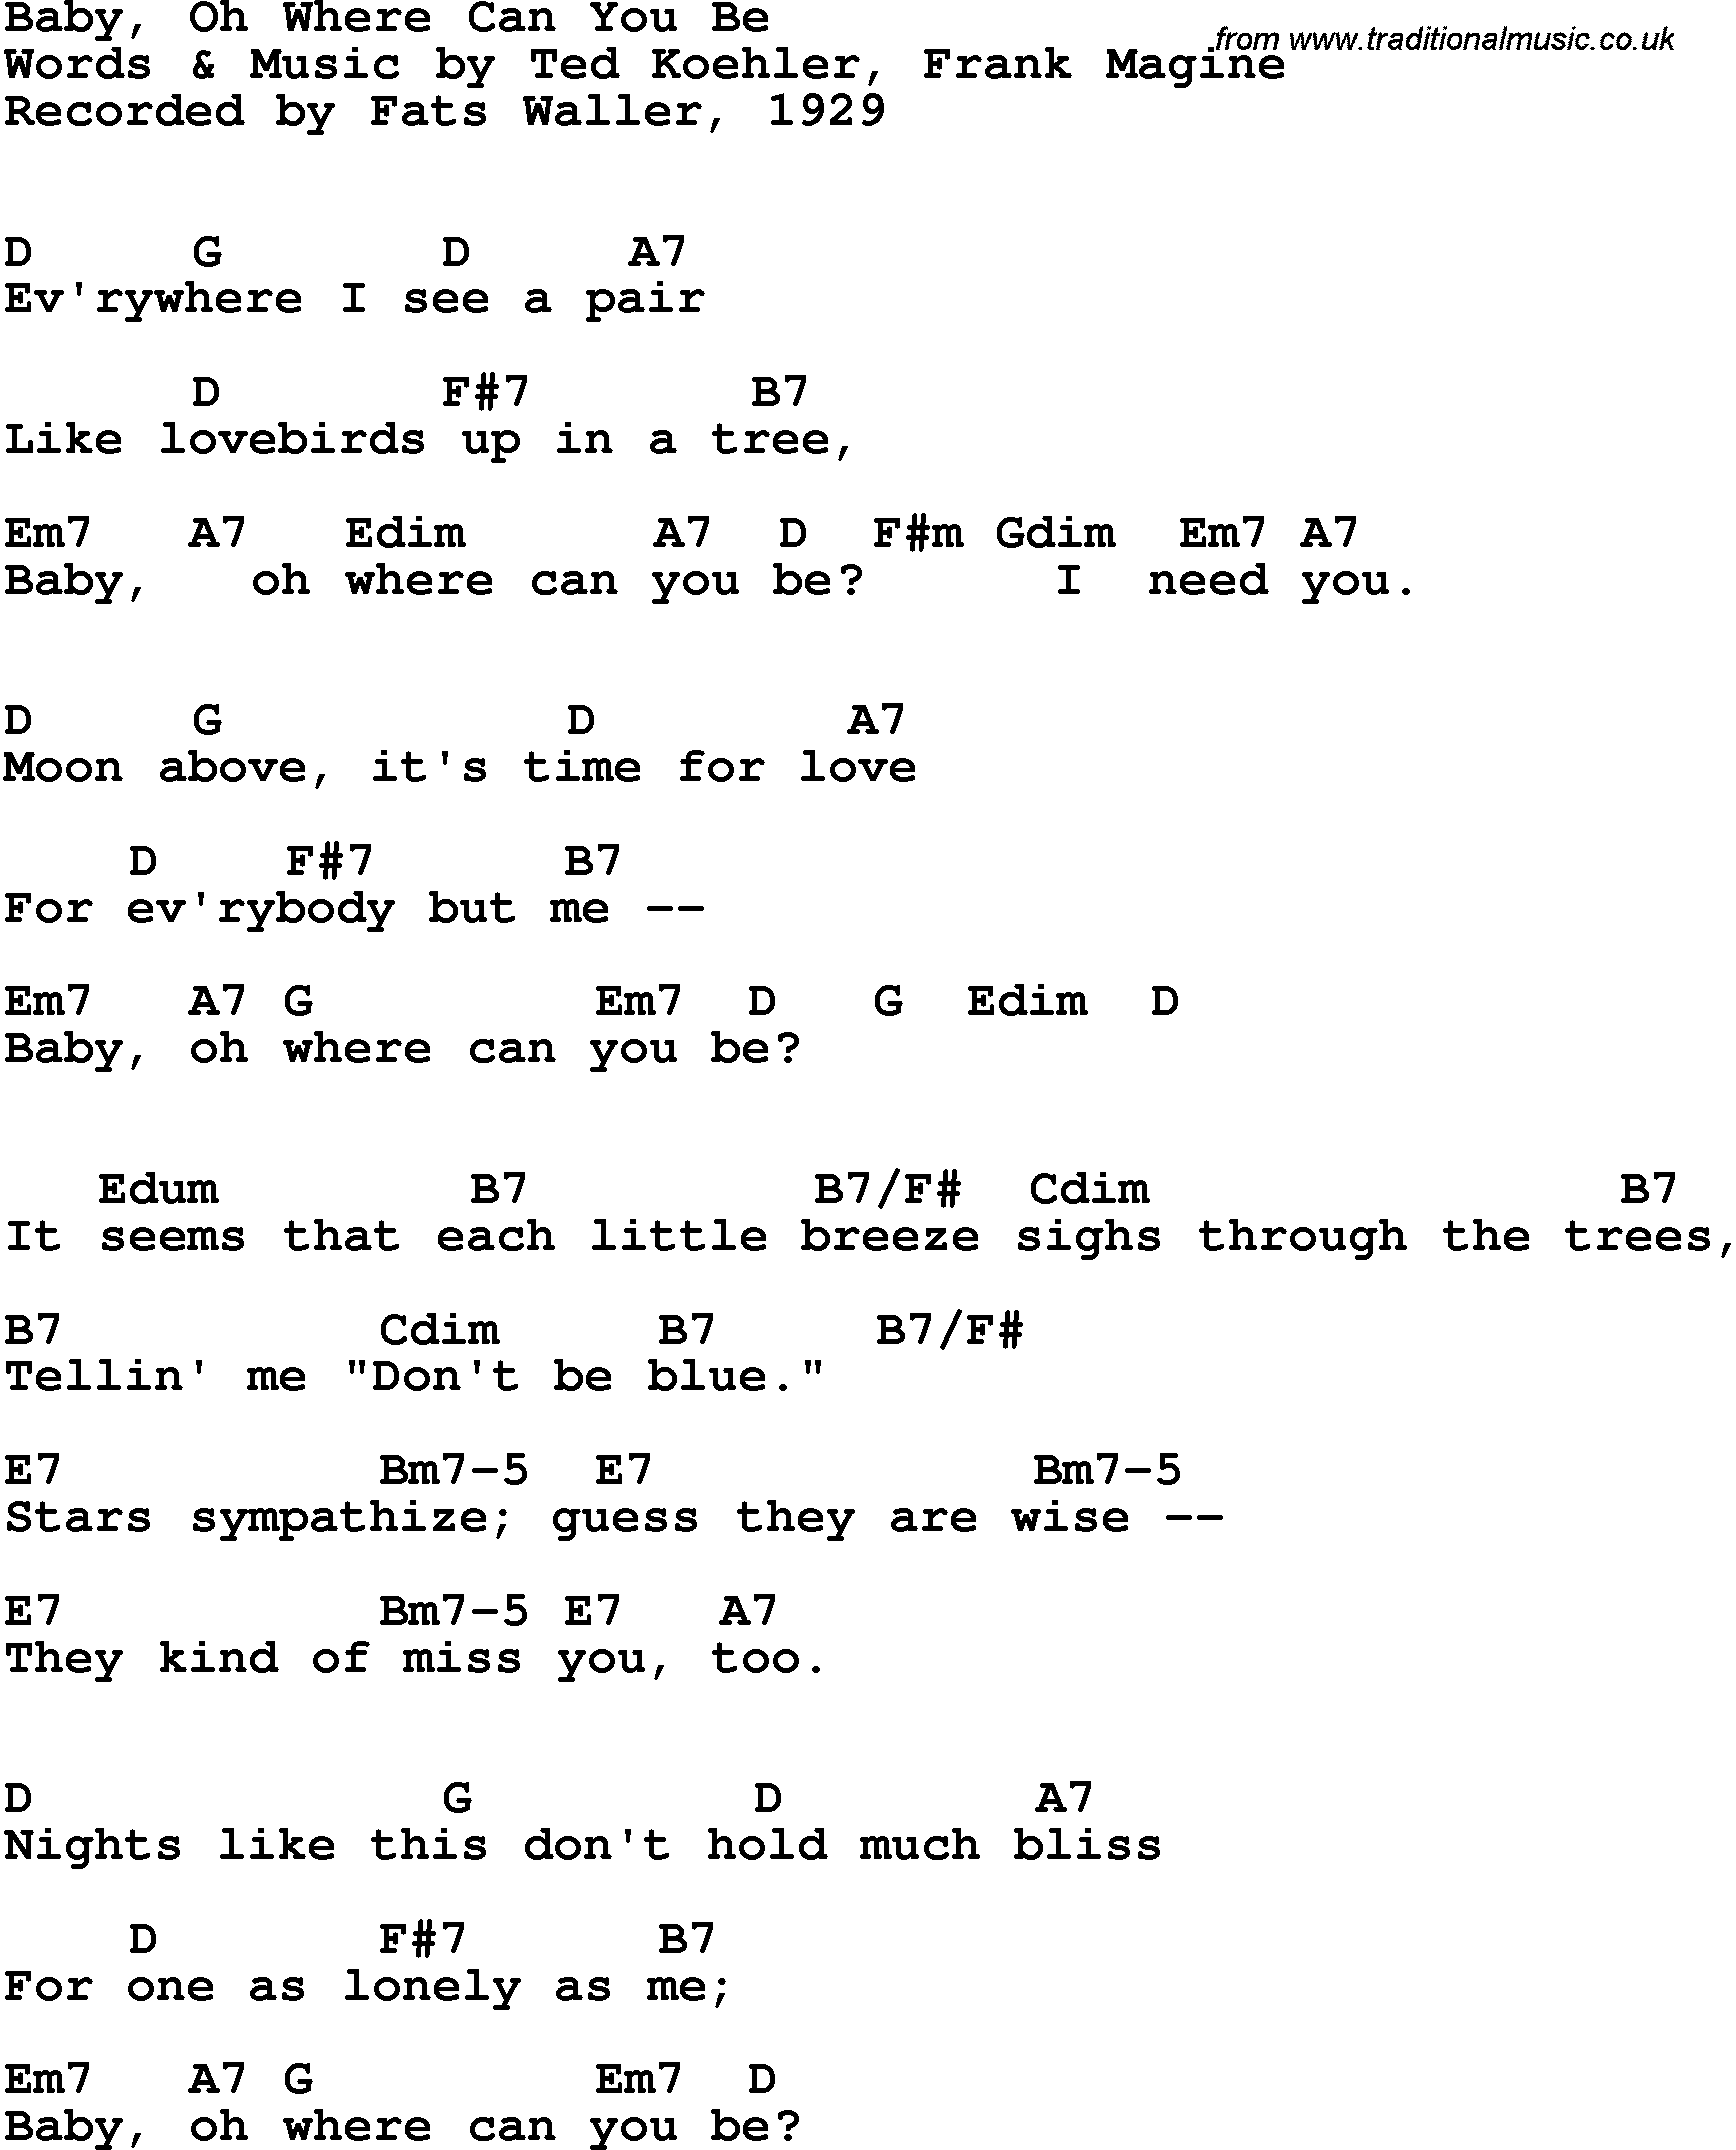 Song Lyrics with guitar chords for Baby, Oh Where Can You Be - Fats Waller, 1929